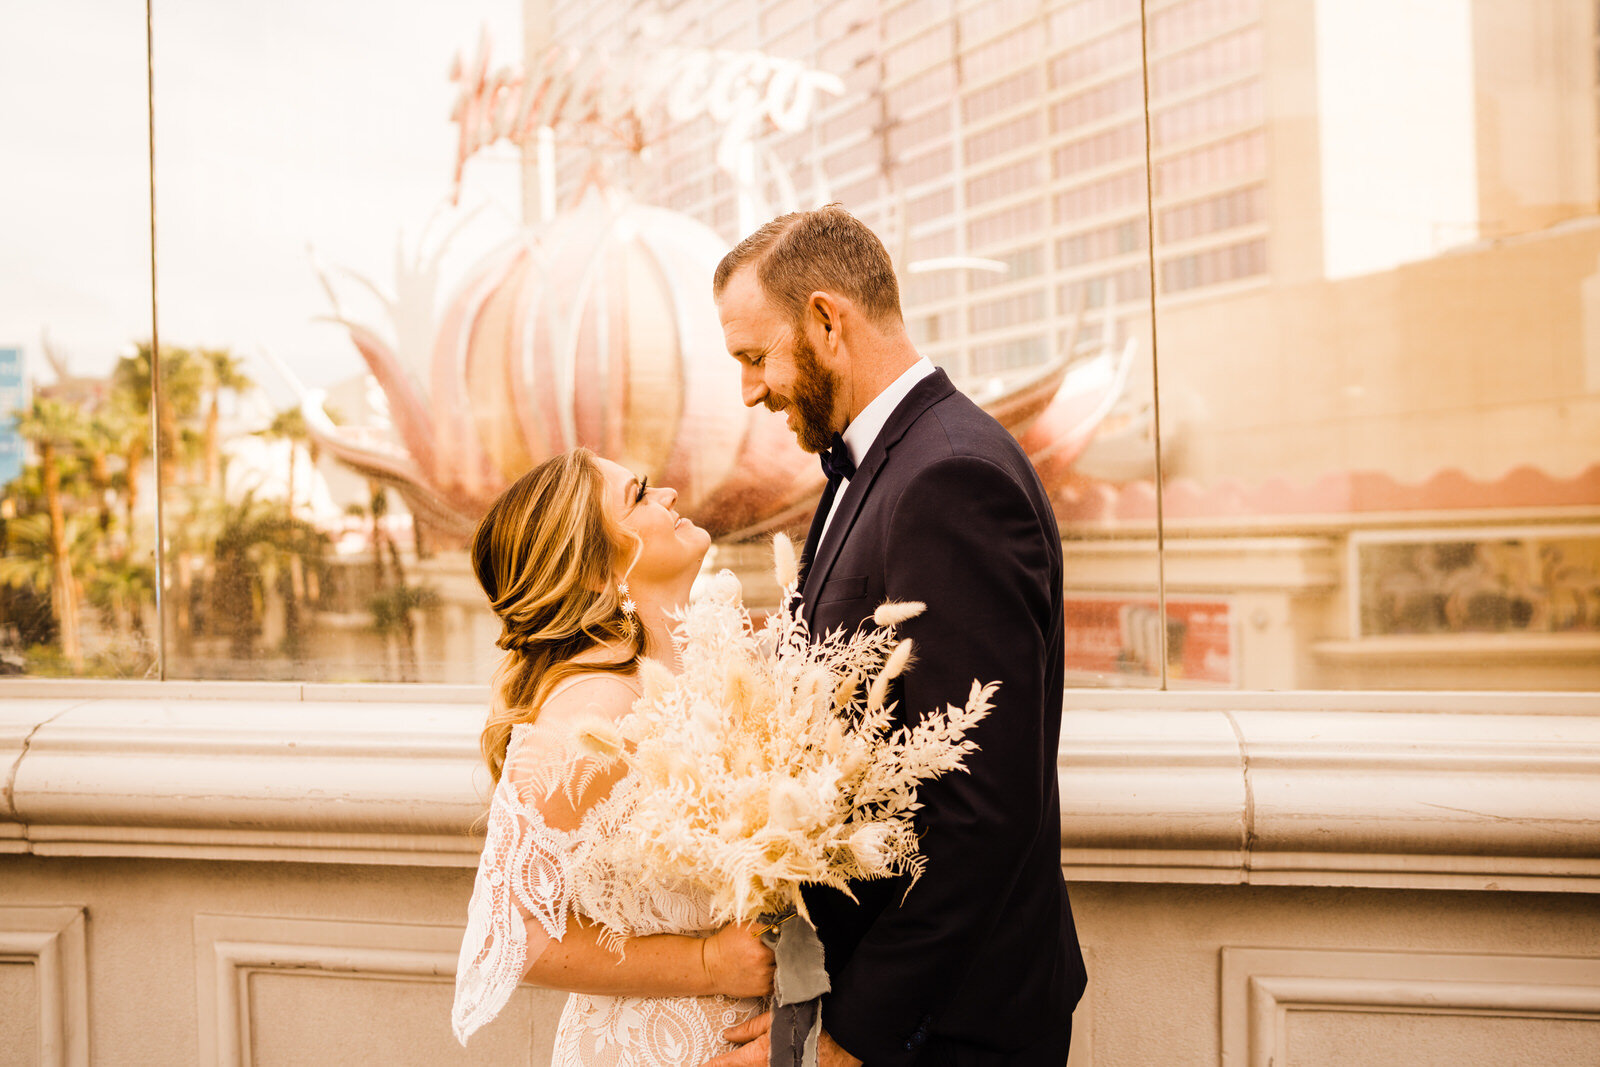 Boho bride with pampas grass bouquet and lace dress and groom in navy suit with bowtie in front of The Flamingo Casino on Las Vegas strip